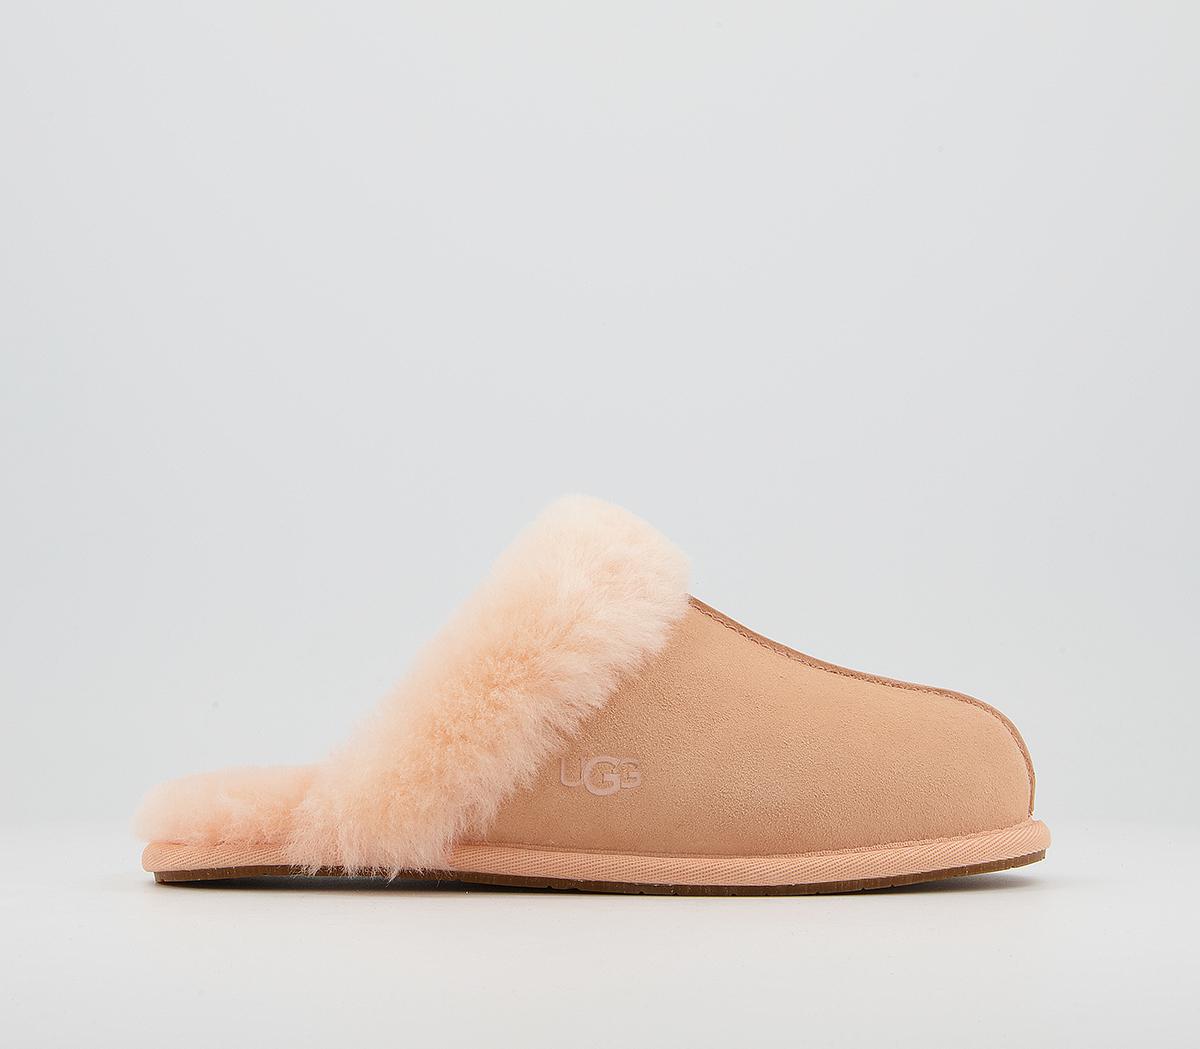 UGG Scuffette II Slippers Scallop - Flat Shoes for Women